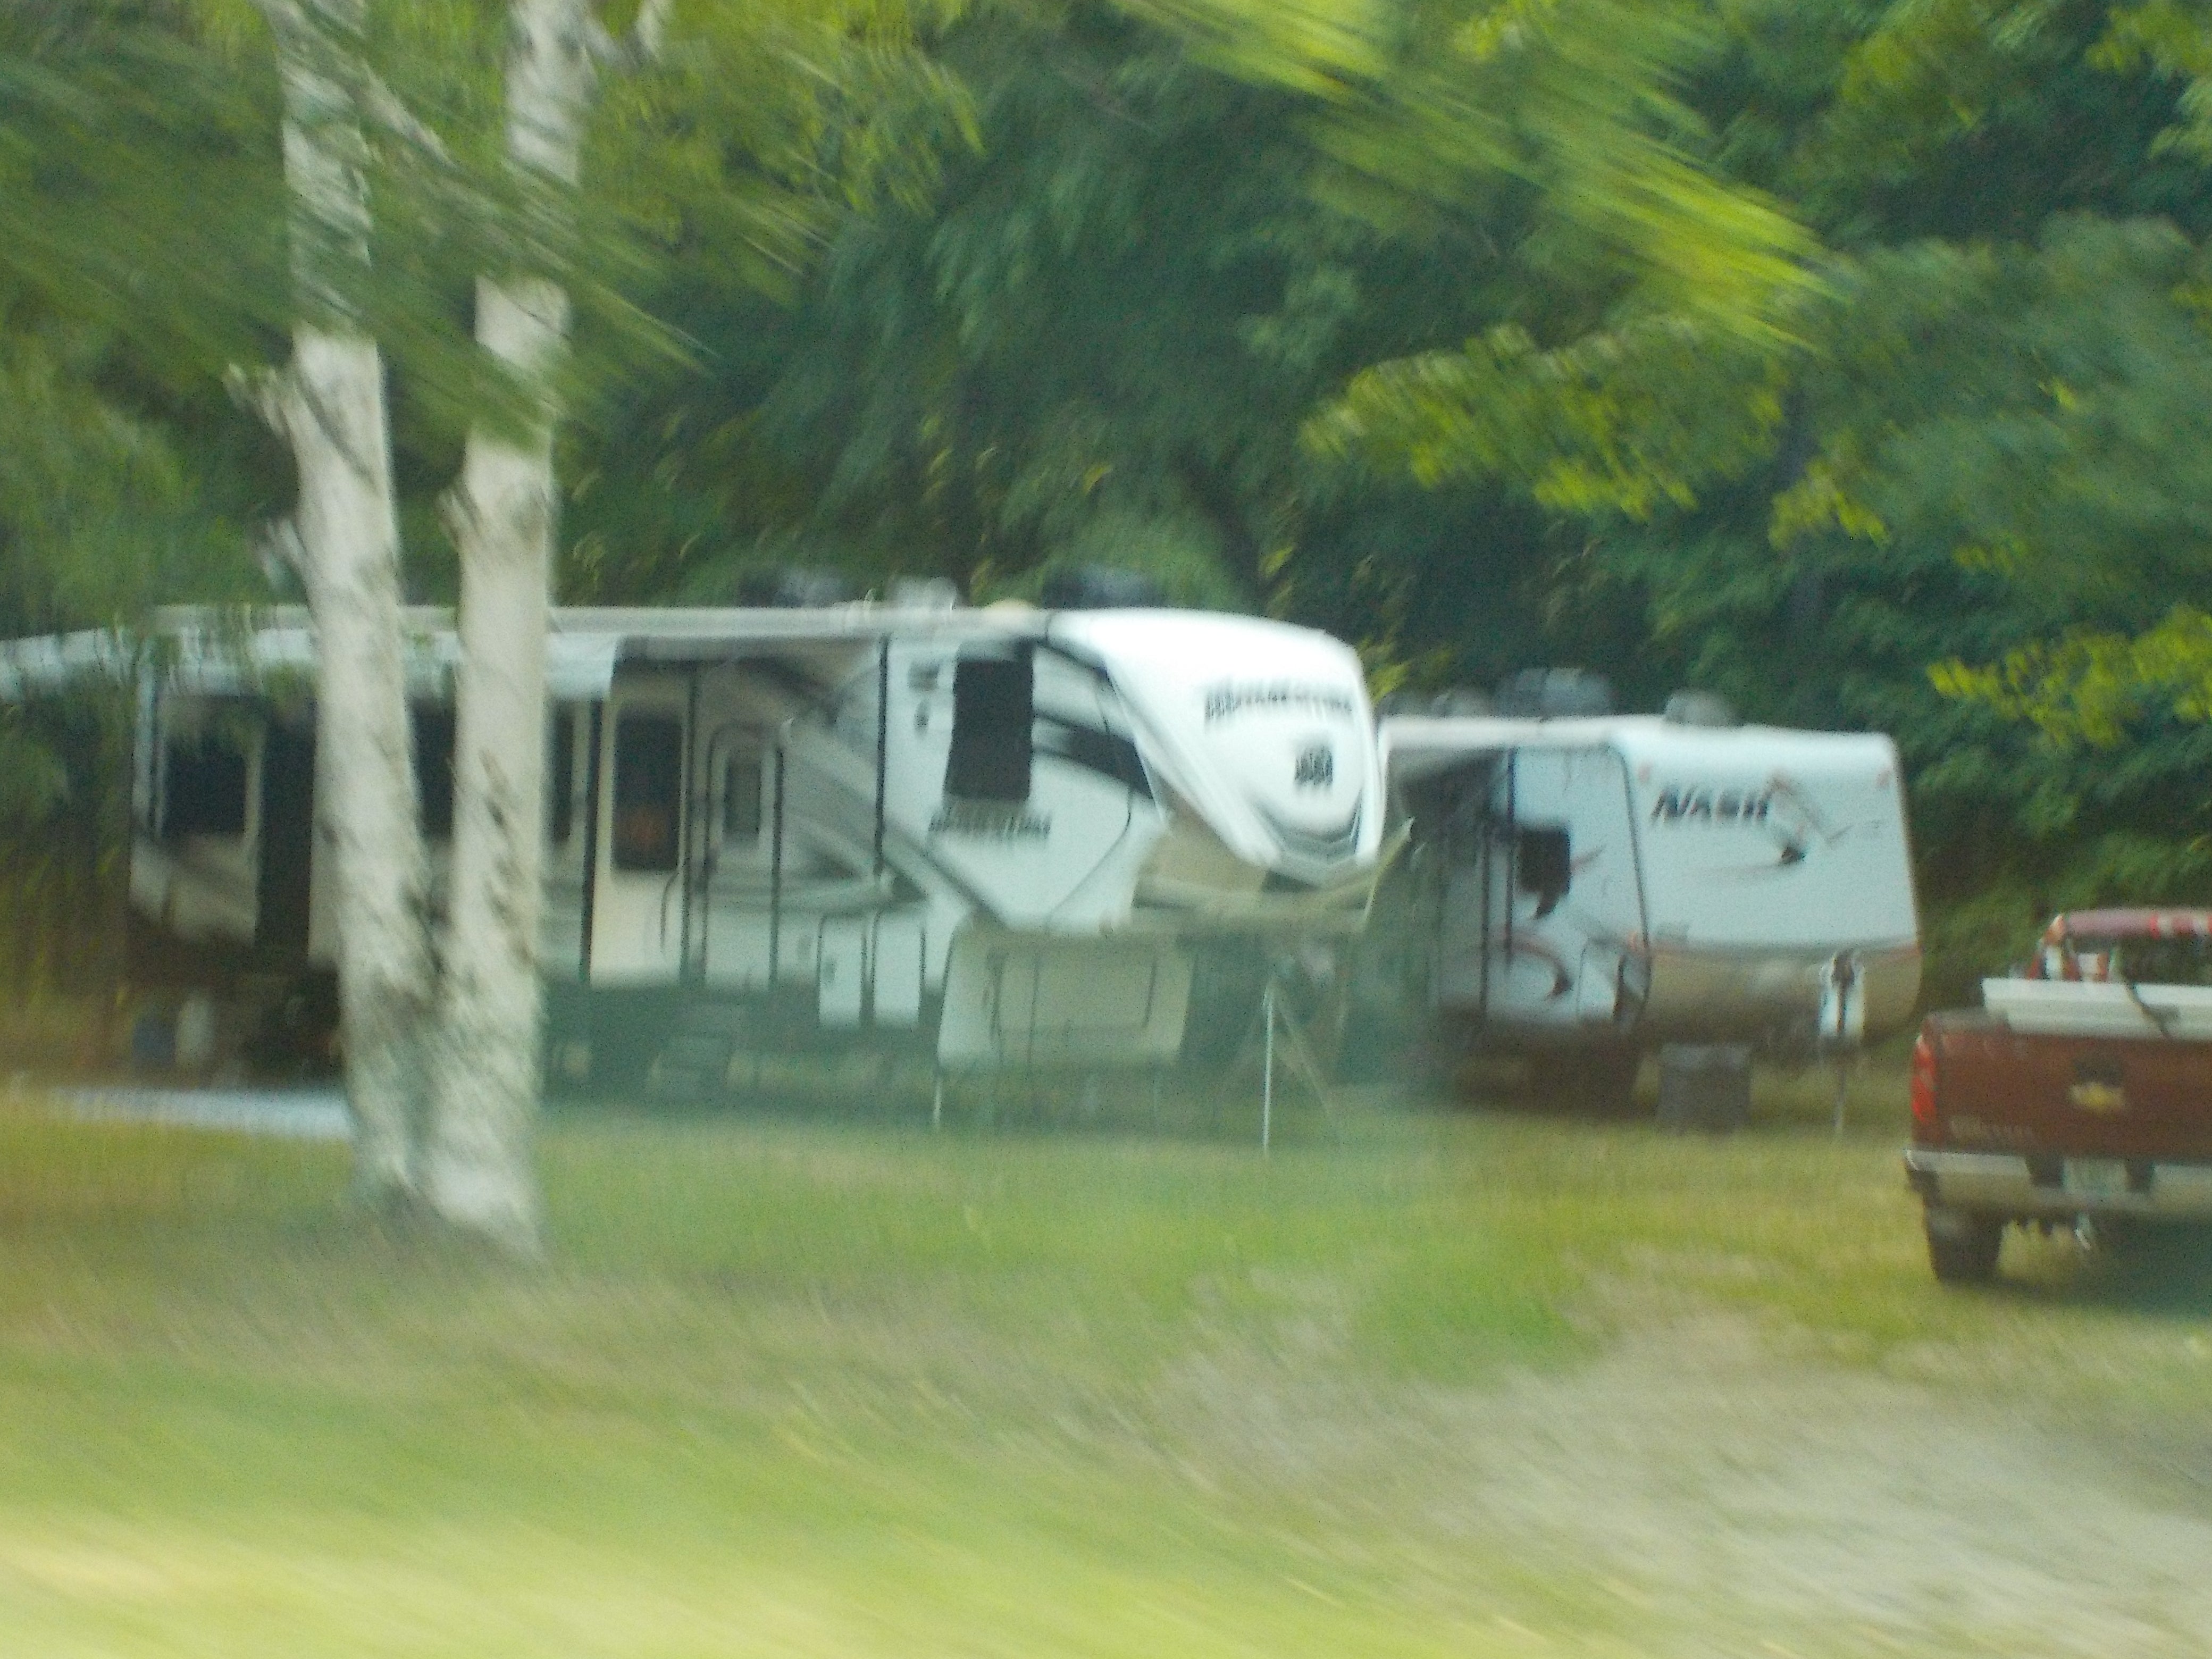 Blurry photo, sorry! Other RV sites among the birch trees